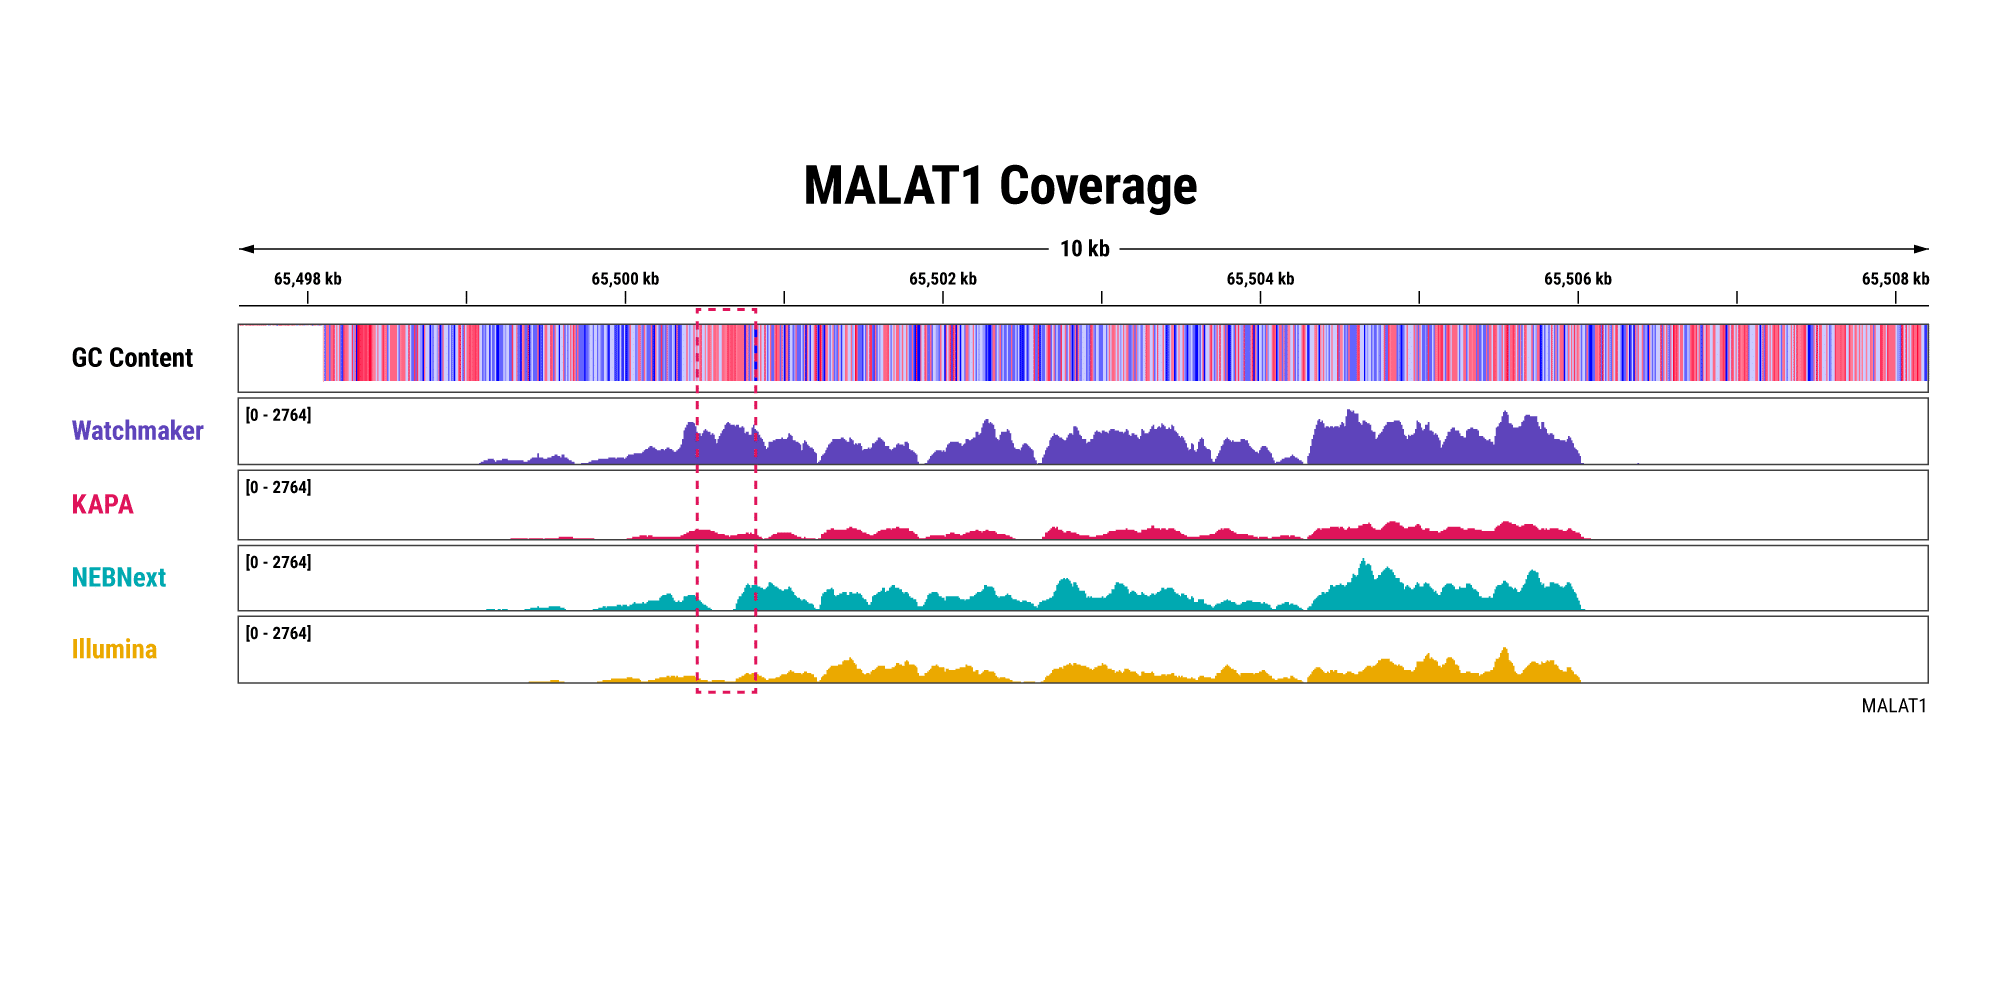 Figure 5B. Improve efficiency and characterize lncRNAs. The Watchmaker solution also provides improved coverage across MALAT1, especially the GC-rich region outlined in red. Libraries were prepared with 10 ng of intact whole blood-derived RNA.